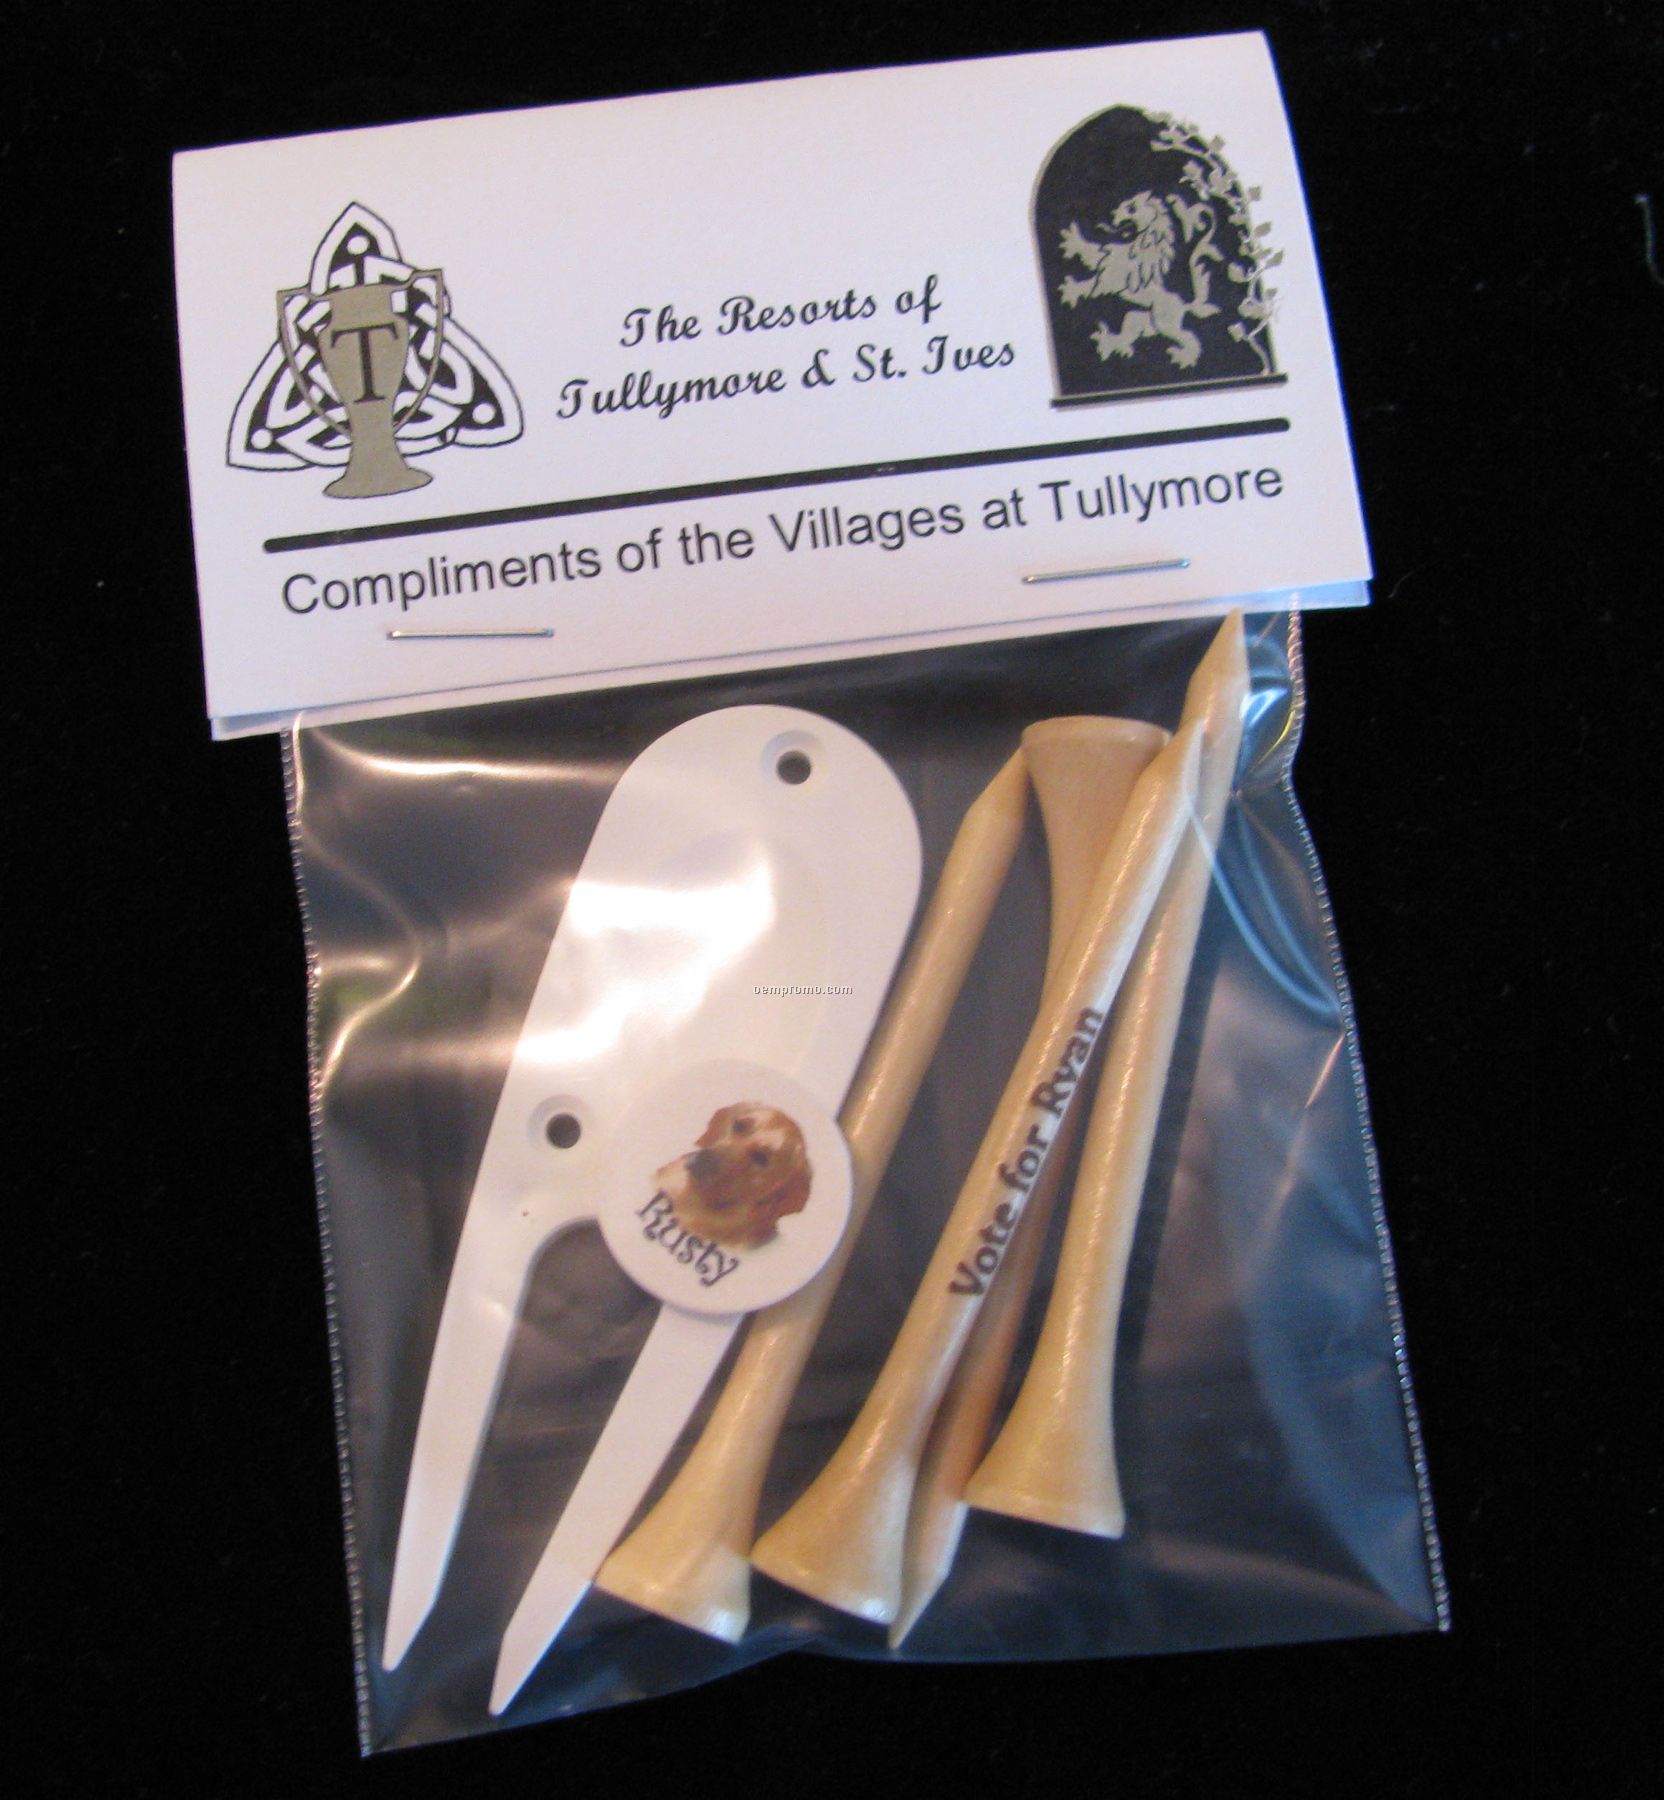 4 Personalized Golf Tees + Ball Marker + Divot Tool